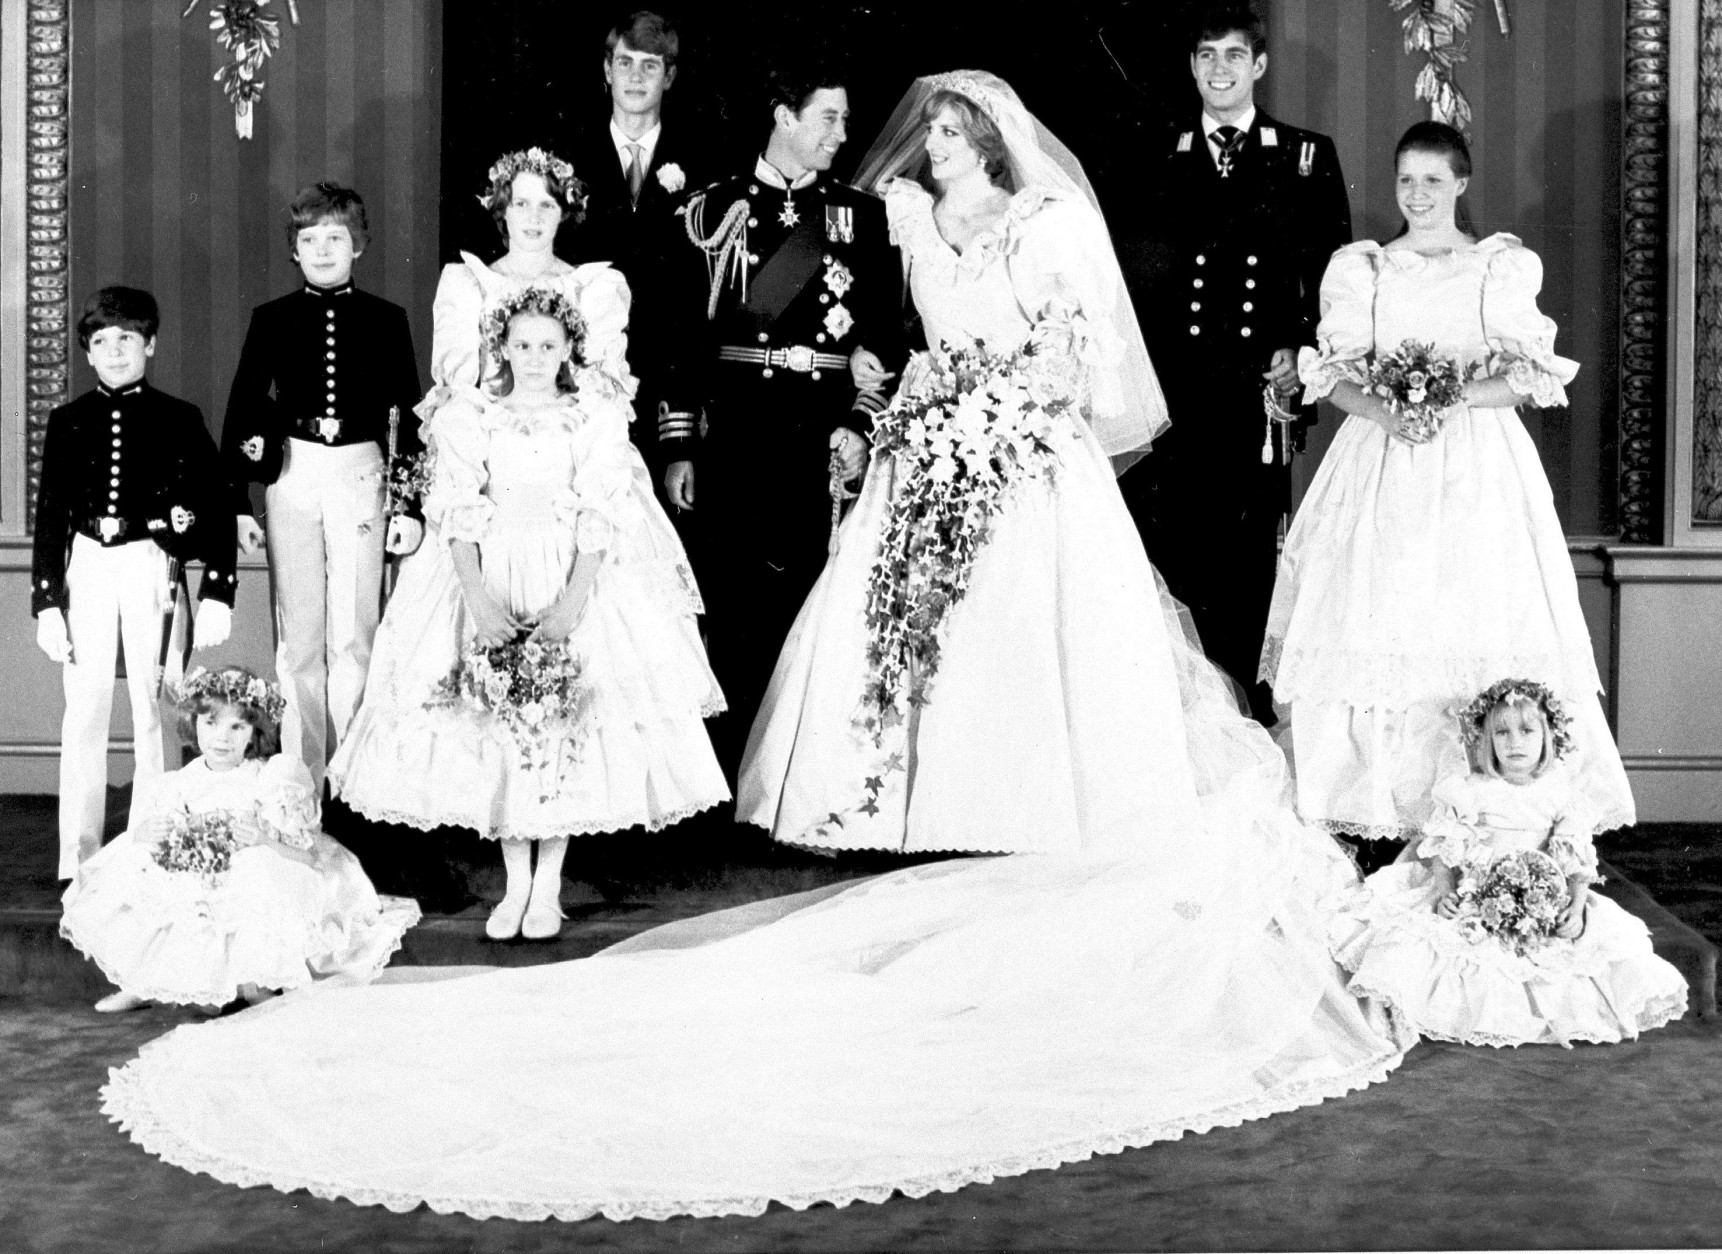 Prince Charles and his bride Diana, Princess of Wales, pose in the Throne Room of Buckingham Palace for this picture made after their wedding at St. Paul's Cathedral today.  Back row, left to right: Edward van Cutsem, Lord Nicholas Windsor, Sarah Jane Gaselee, Prince Edward, Prince Charles, The Princess of Wales, Prince Andrew and Lady Sarah Armstrong-Jones. Front row, left to right: Catherine Cameron, seated, India Hicks, standing, and Clementine Hambro, seated.  (AP Photo, BIPNA, Pool)